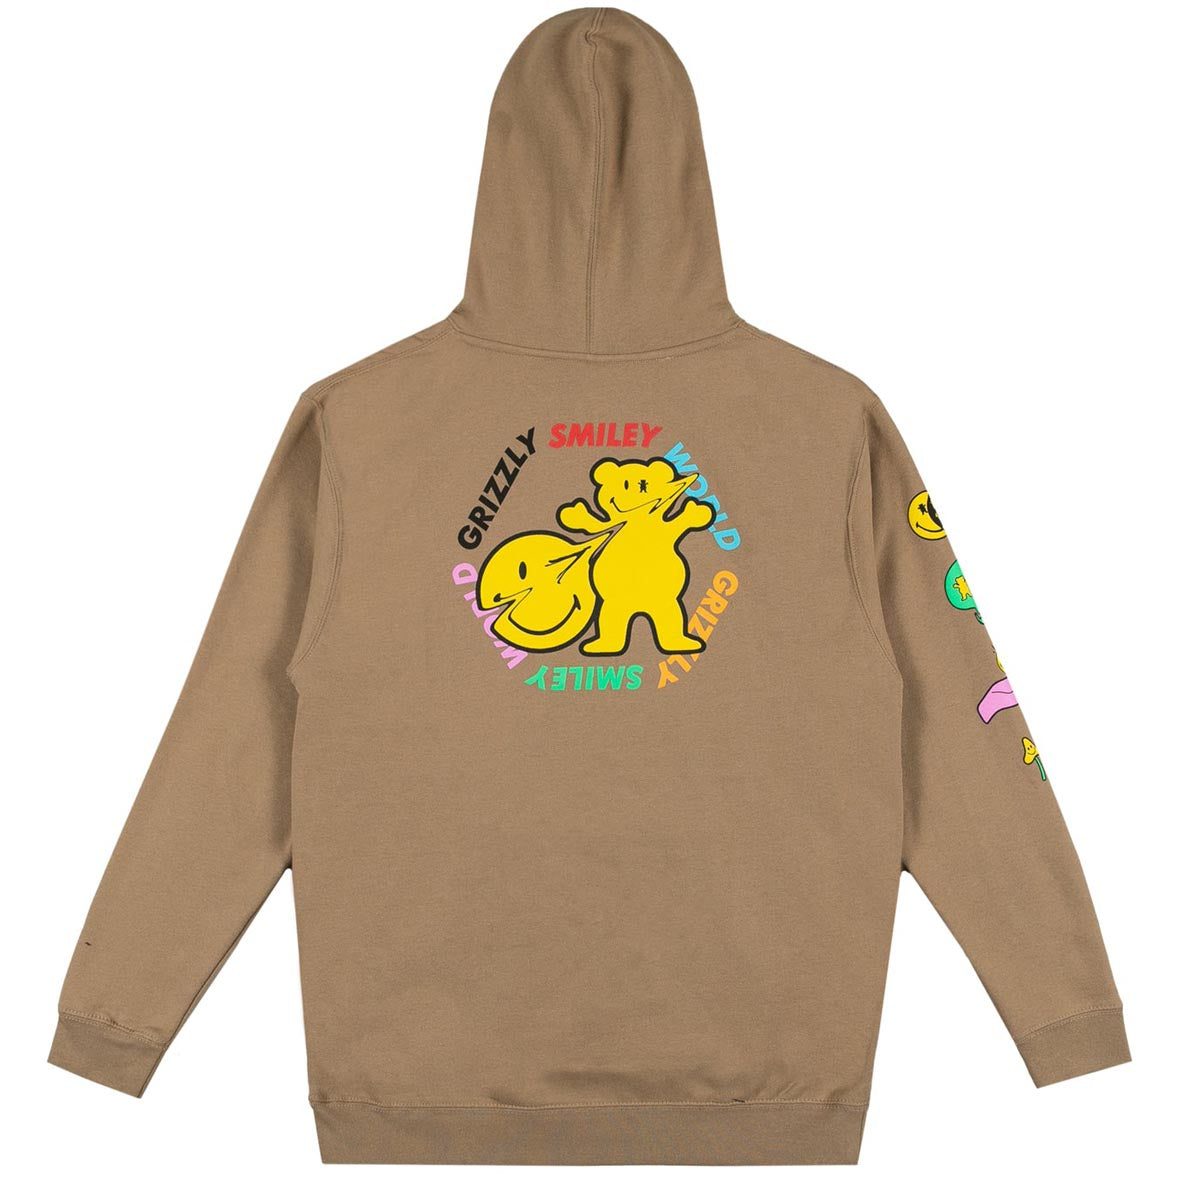 Grizzly x Smiley World Hoodie - Tan image 2